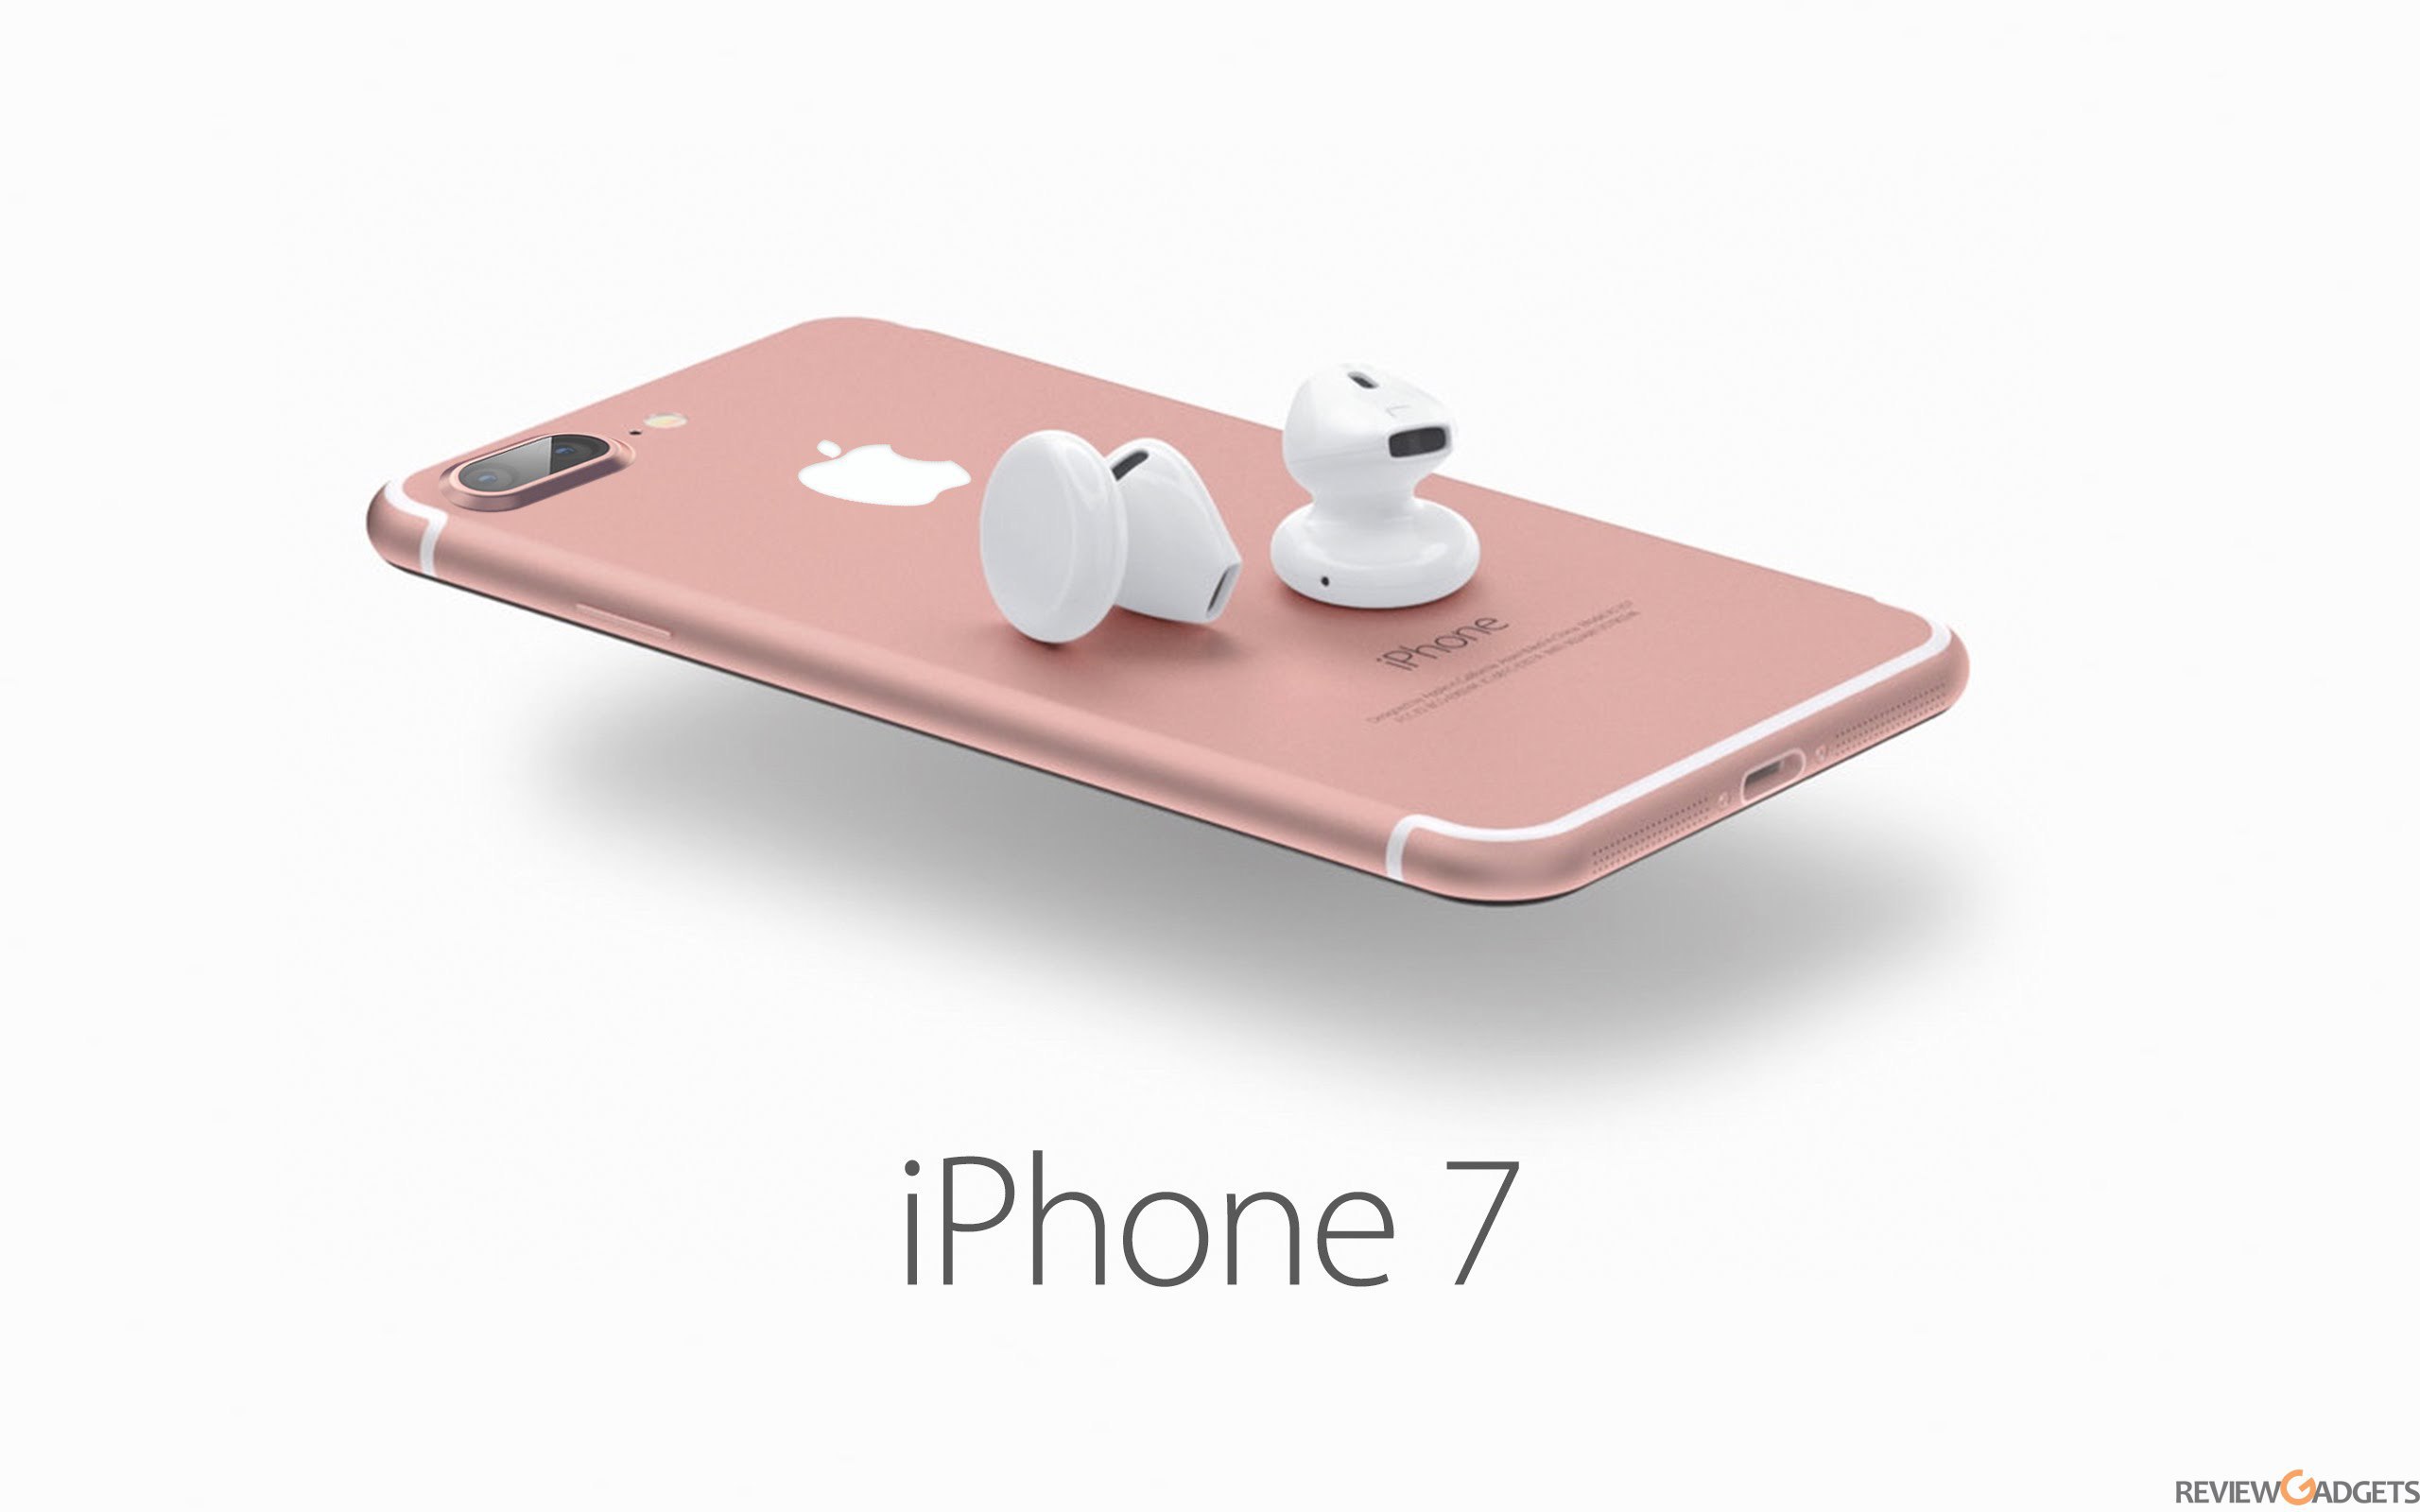 iPhone 7 specs and its launch date in UK